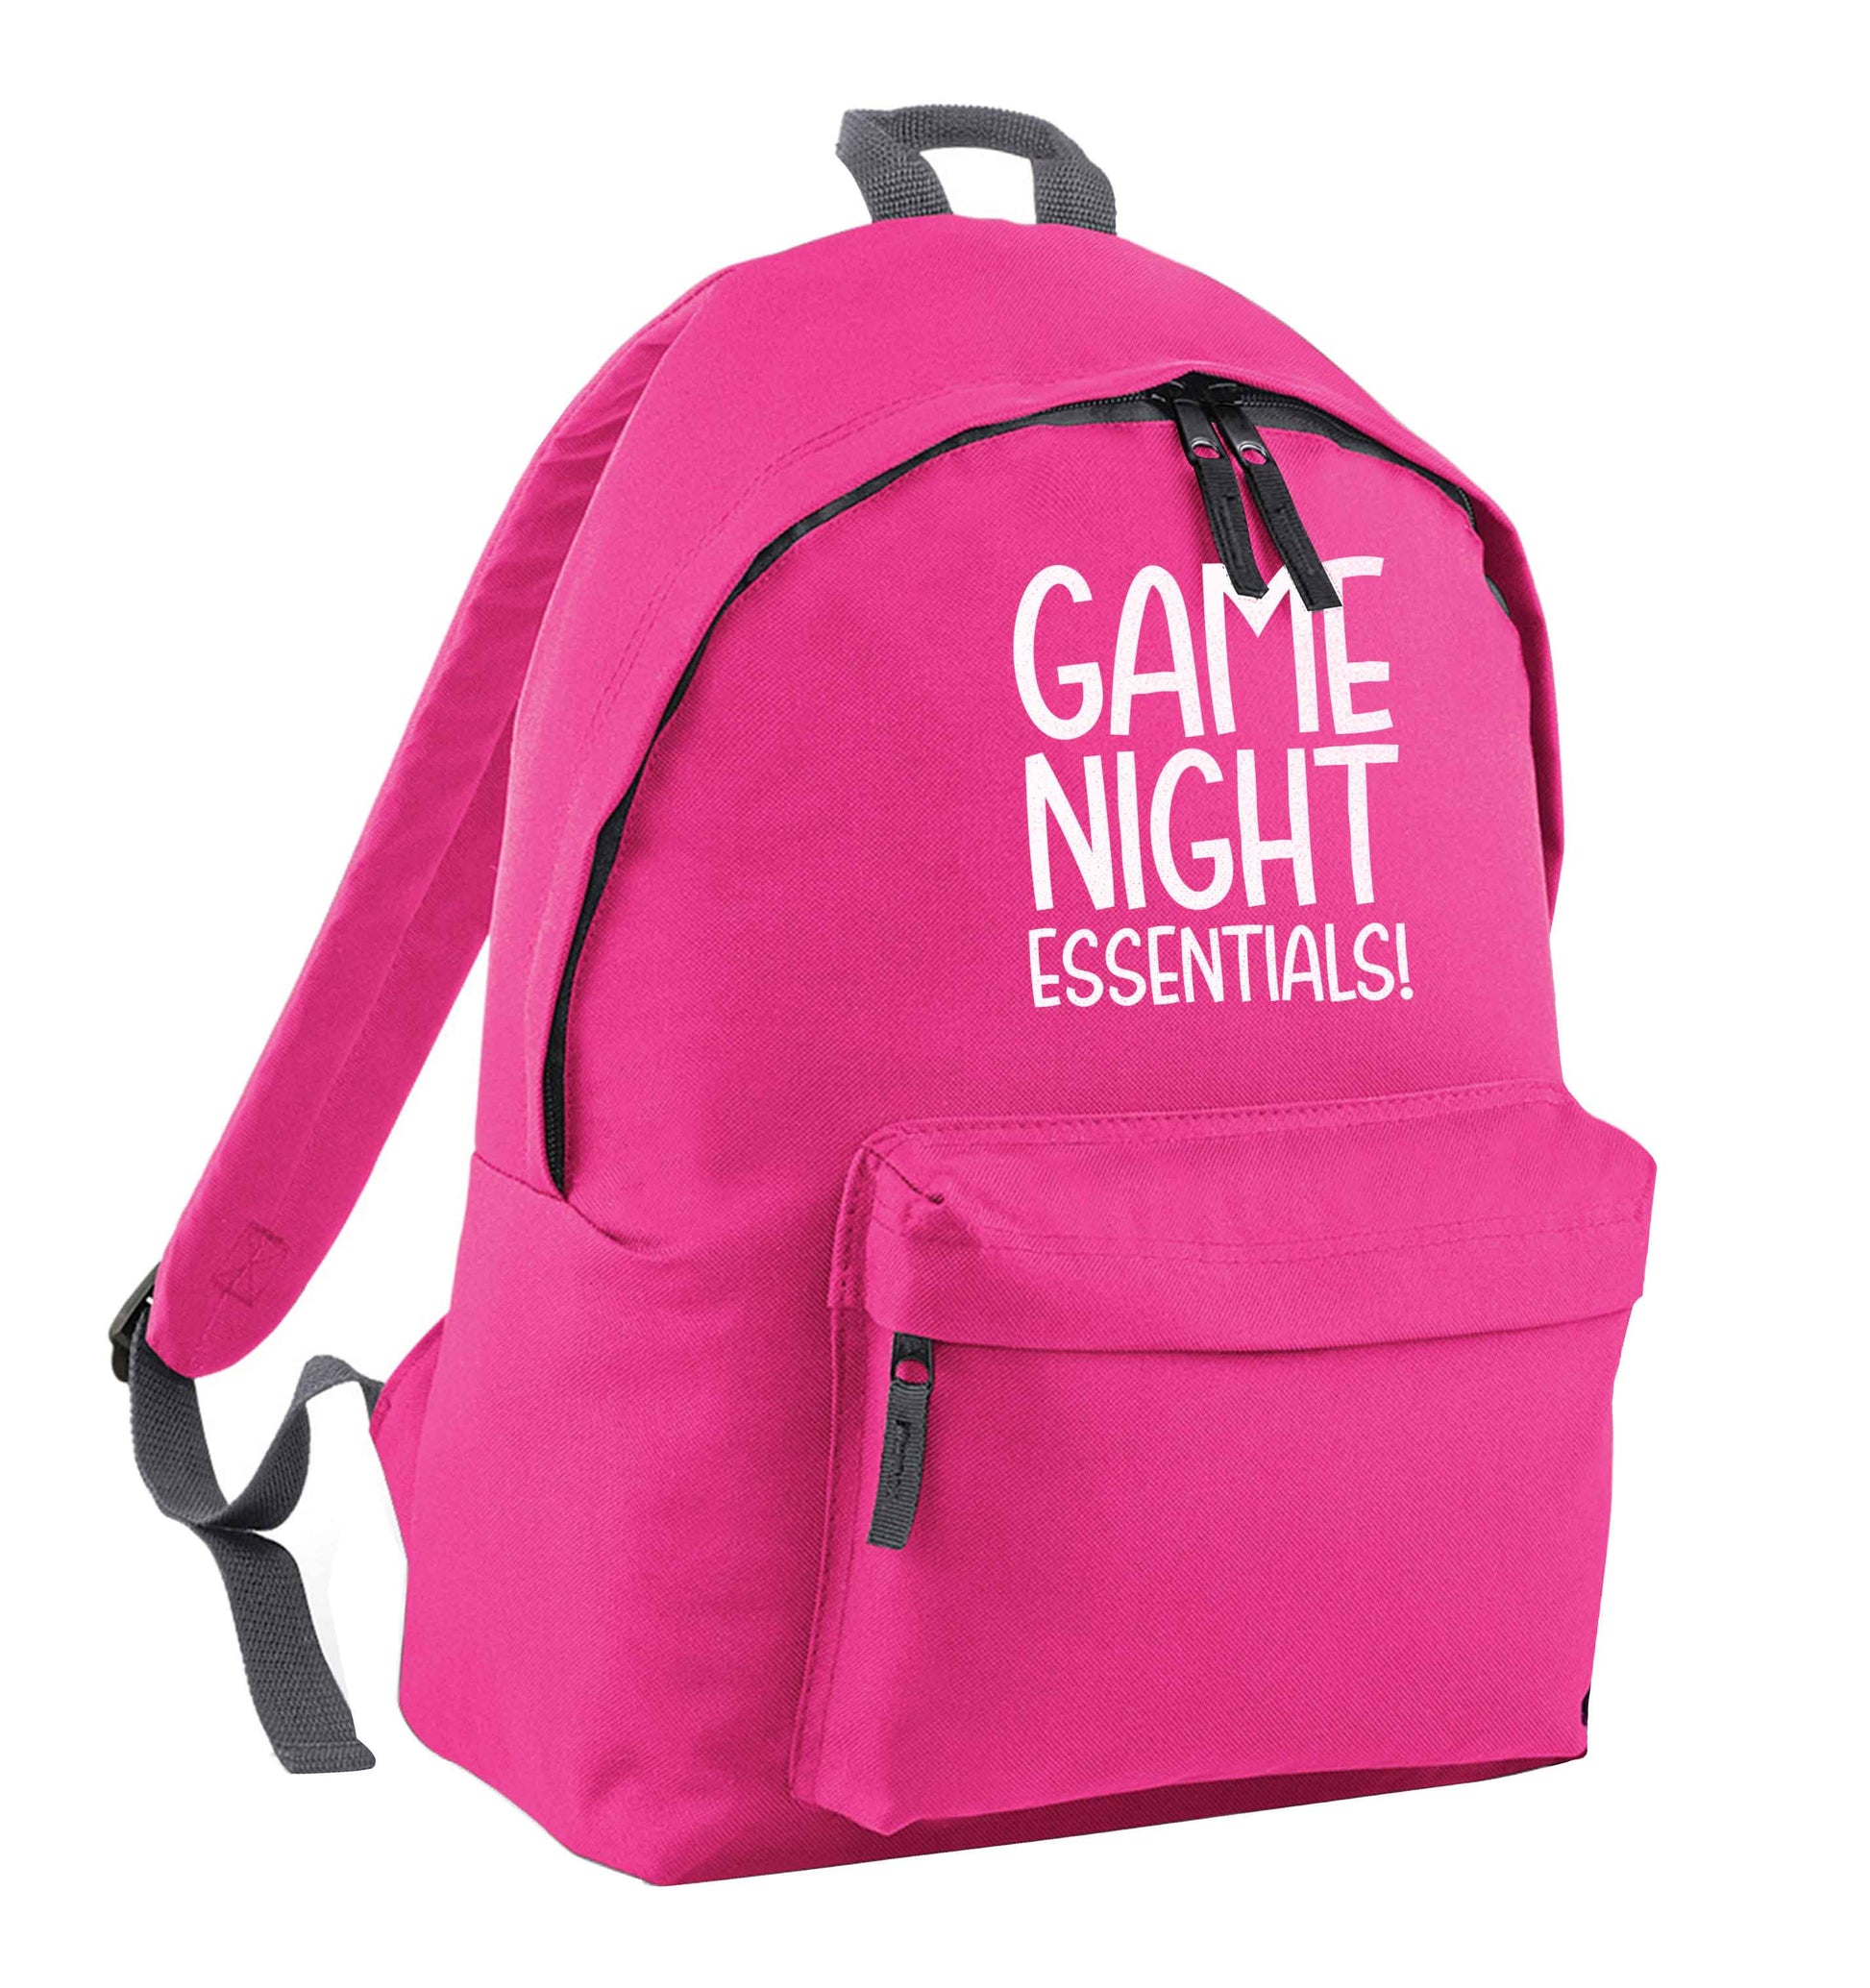 Game night essentials pink adults backpack